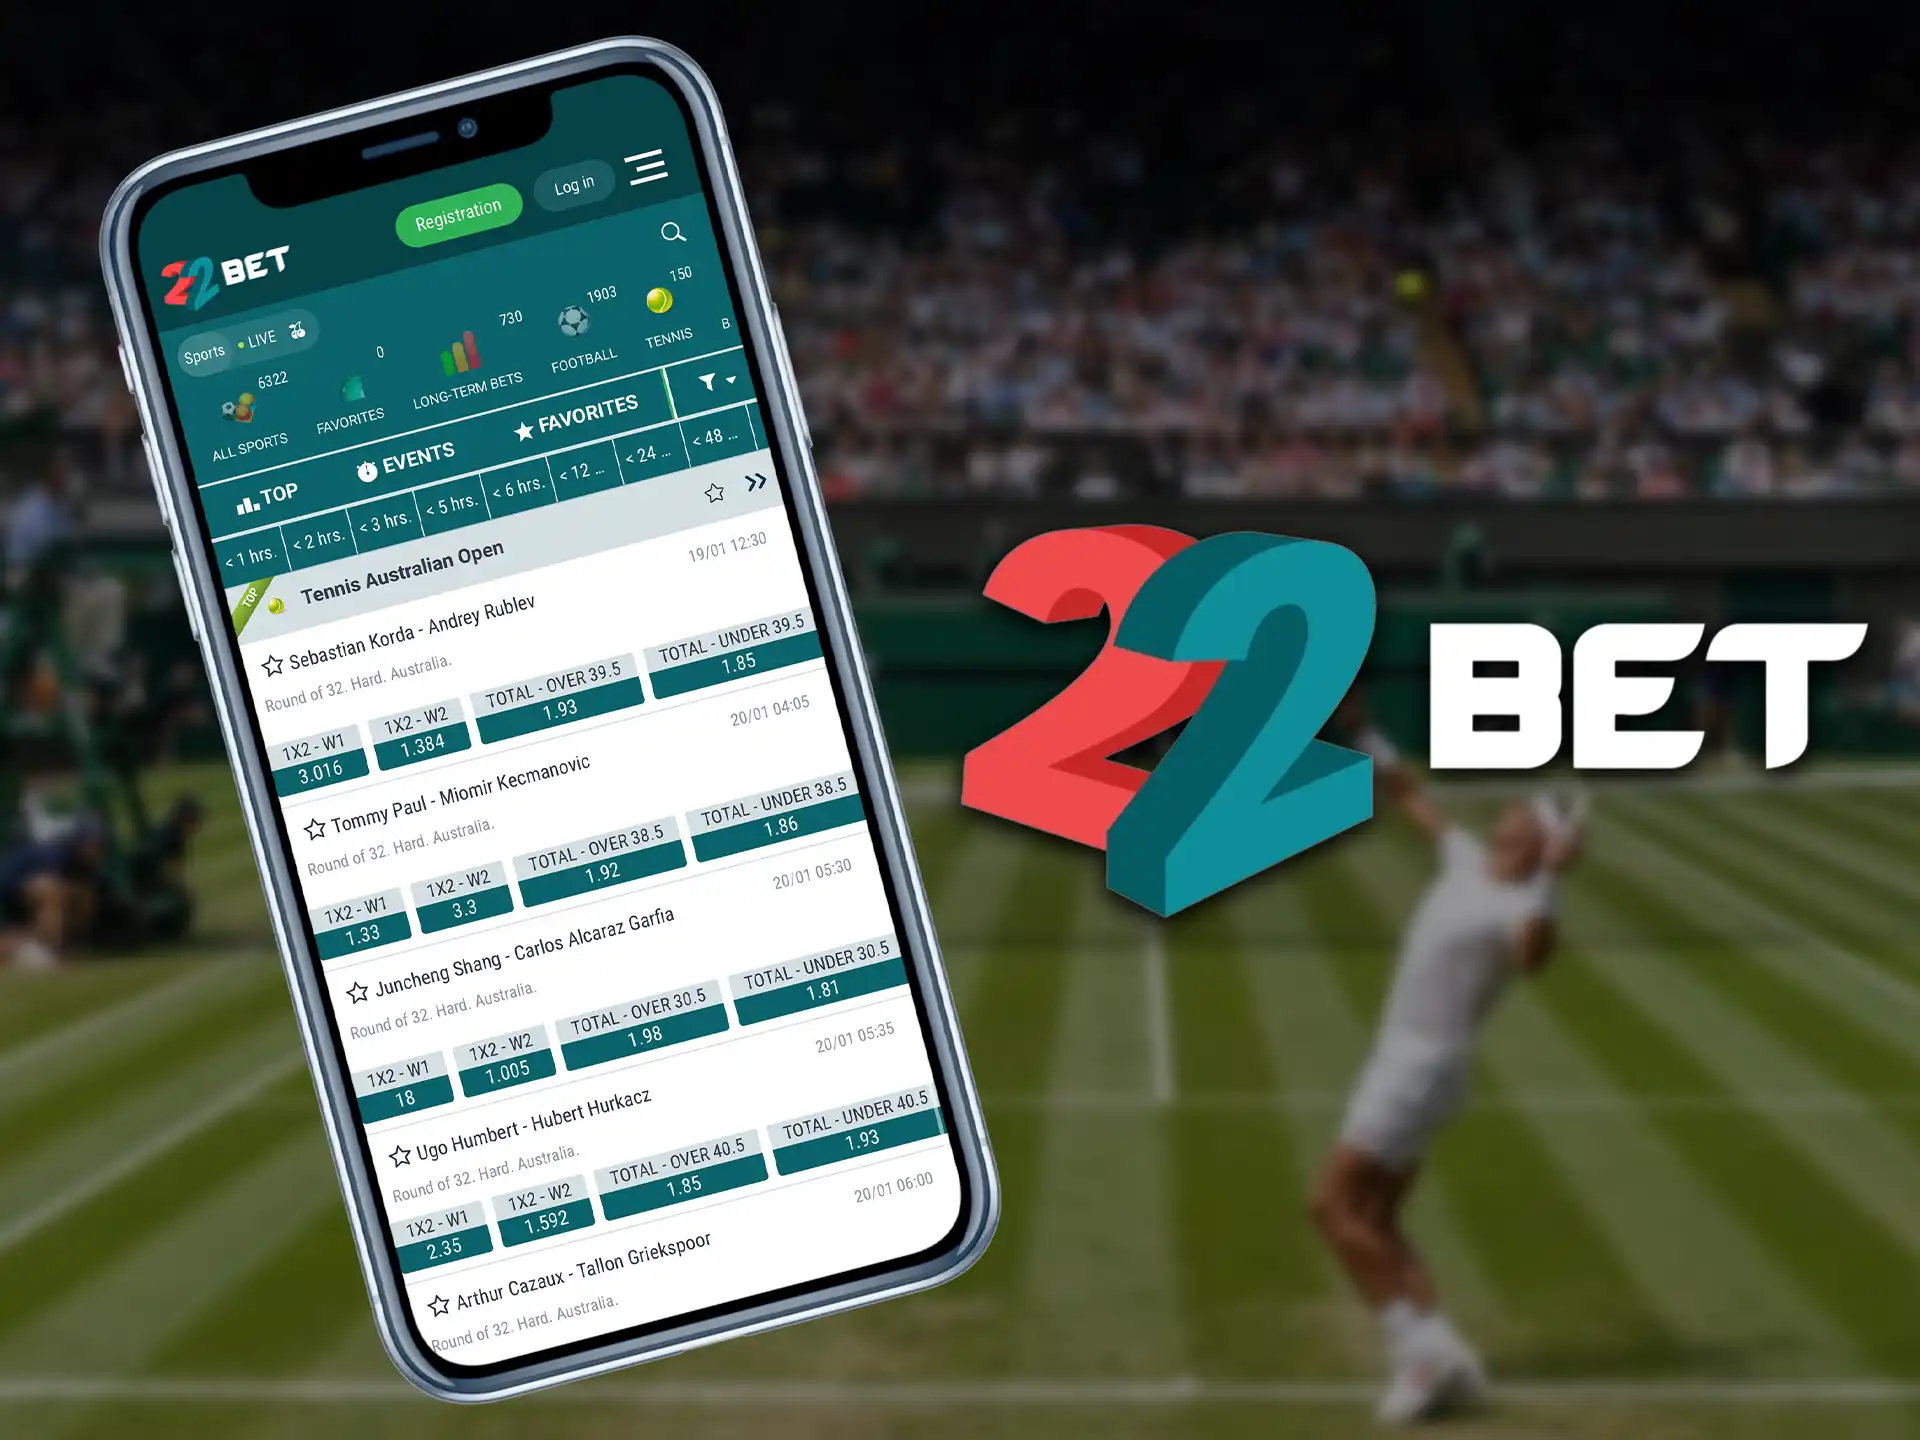 Download the 22Bet app to get access to tennis betting.